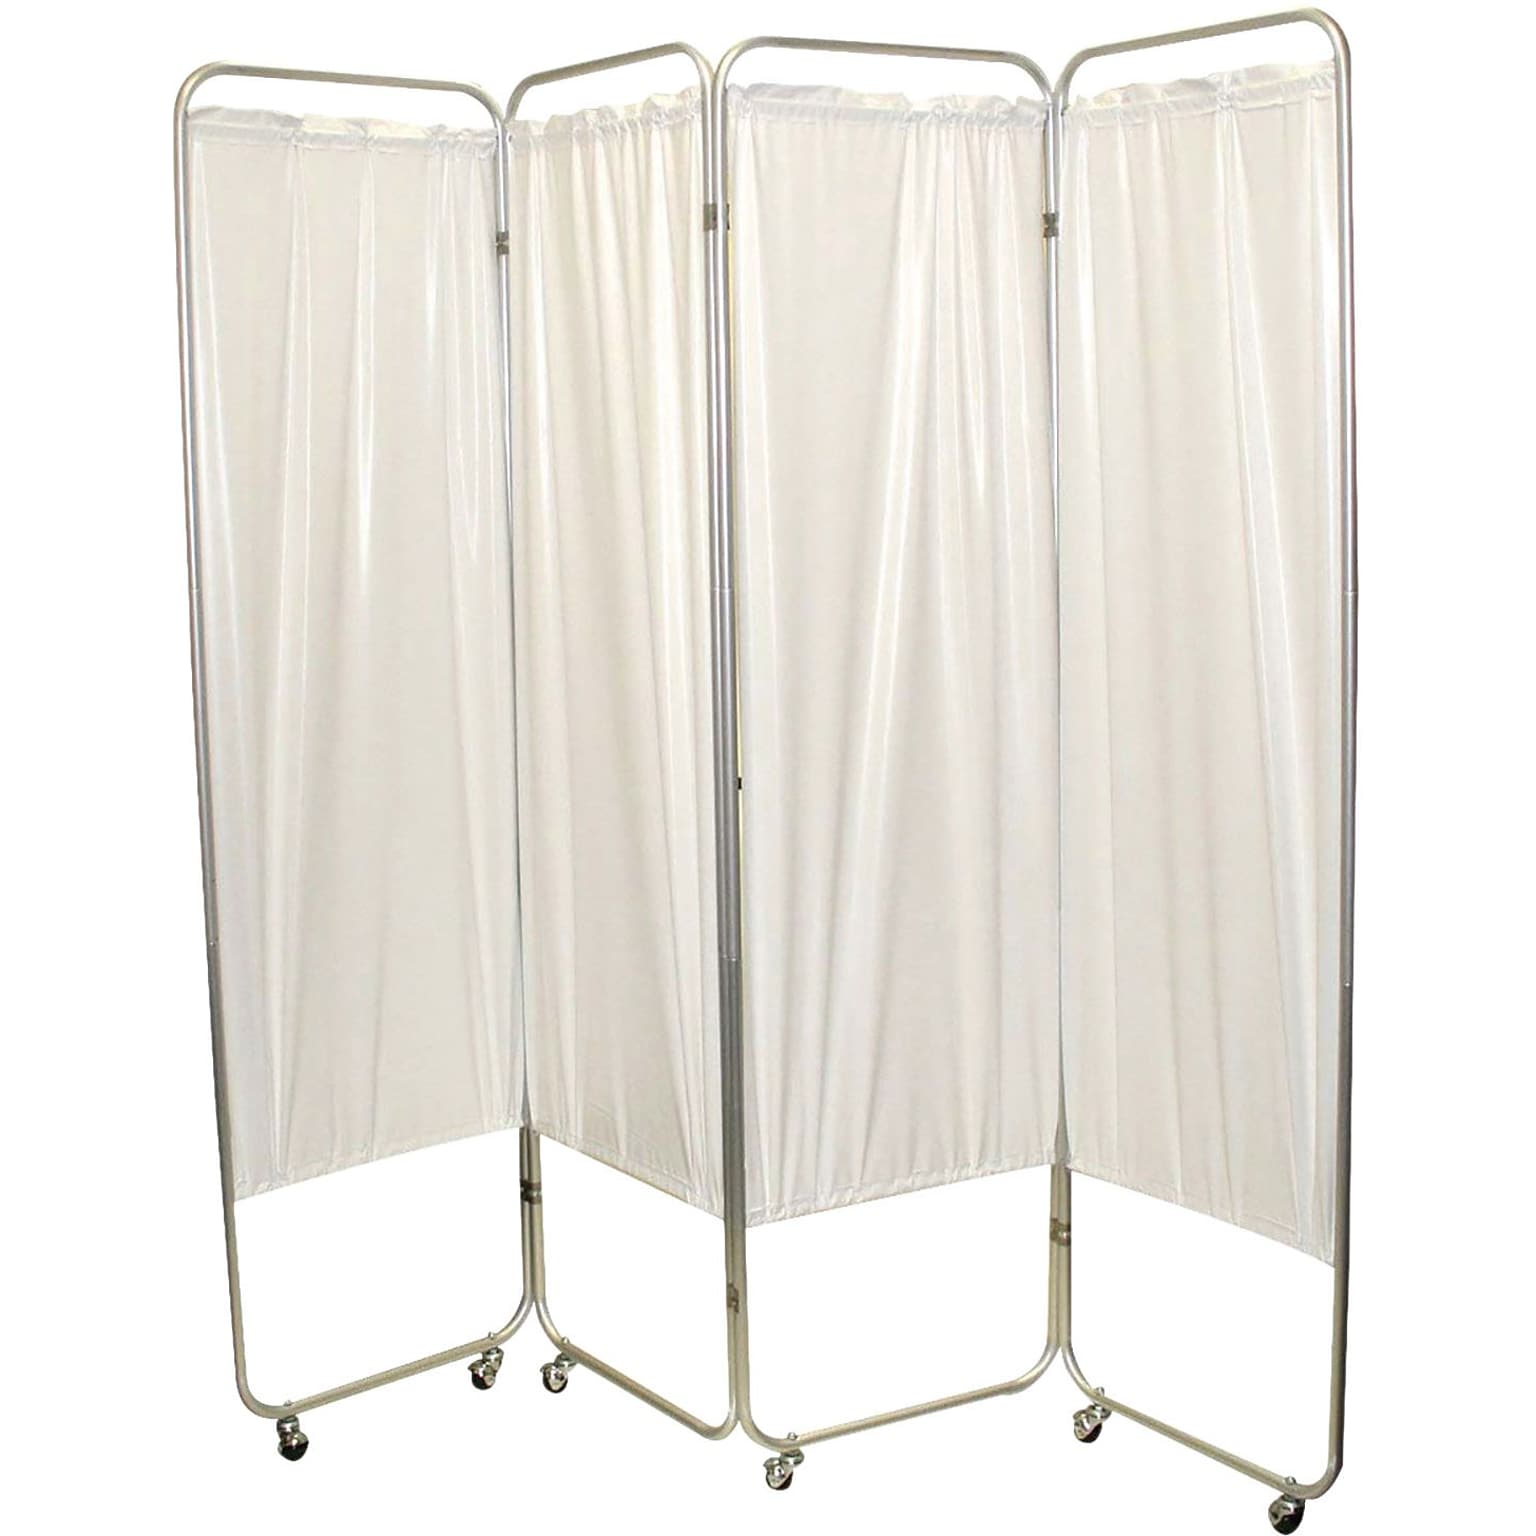 Standard 3-Panel Vinyl Privacy Screen with Casters